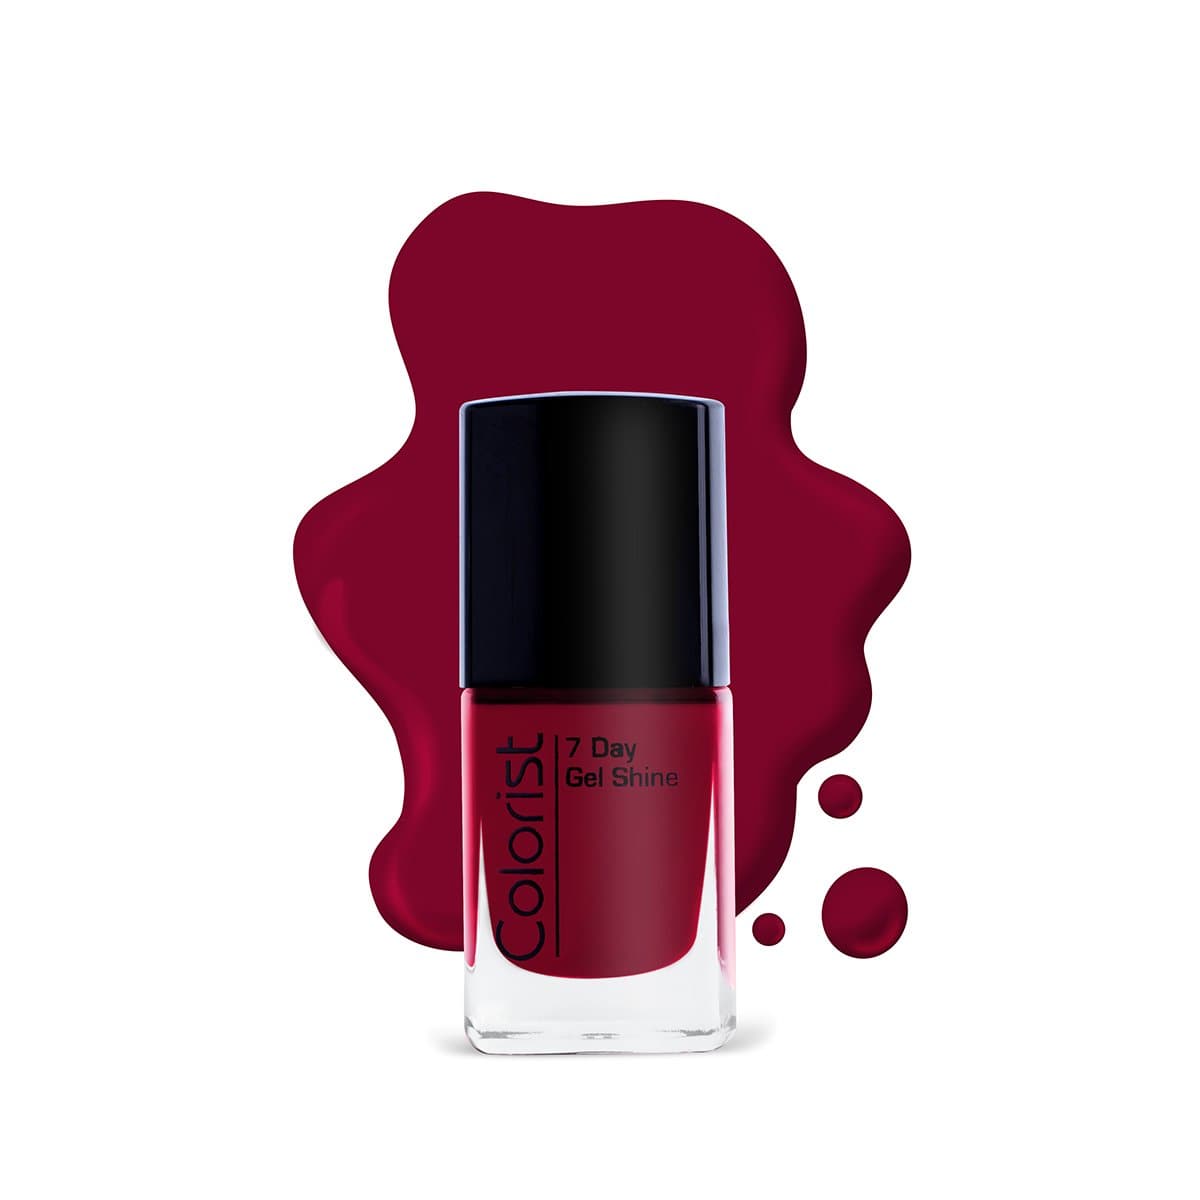 ST London Colorist Nail Paint - St006 Vamp Red - Premium Health & Beauty from St London - Just Rs 330.00! Shop now at Cozmetica